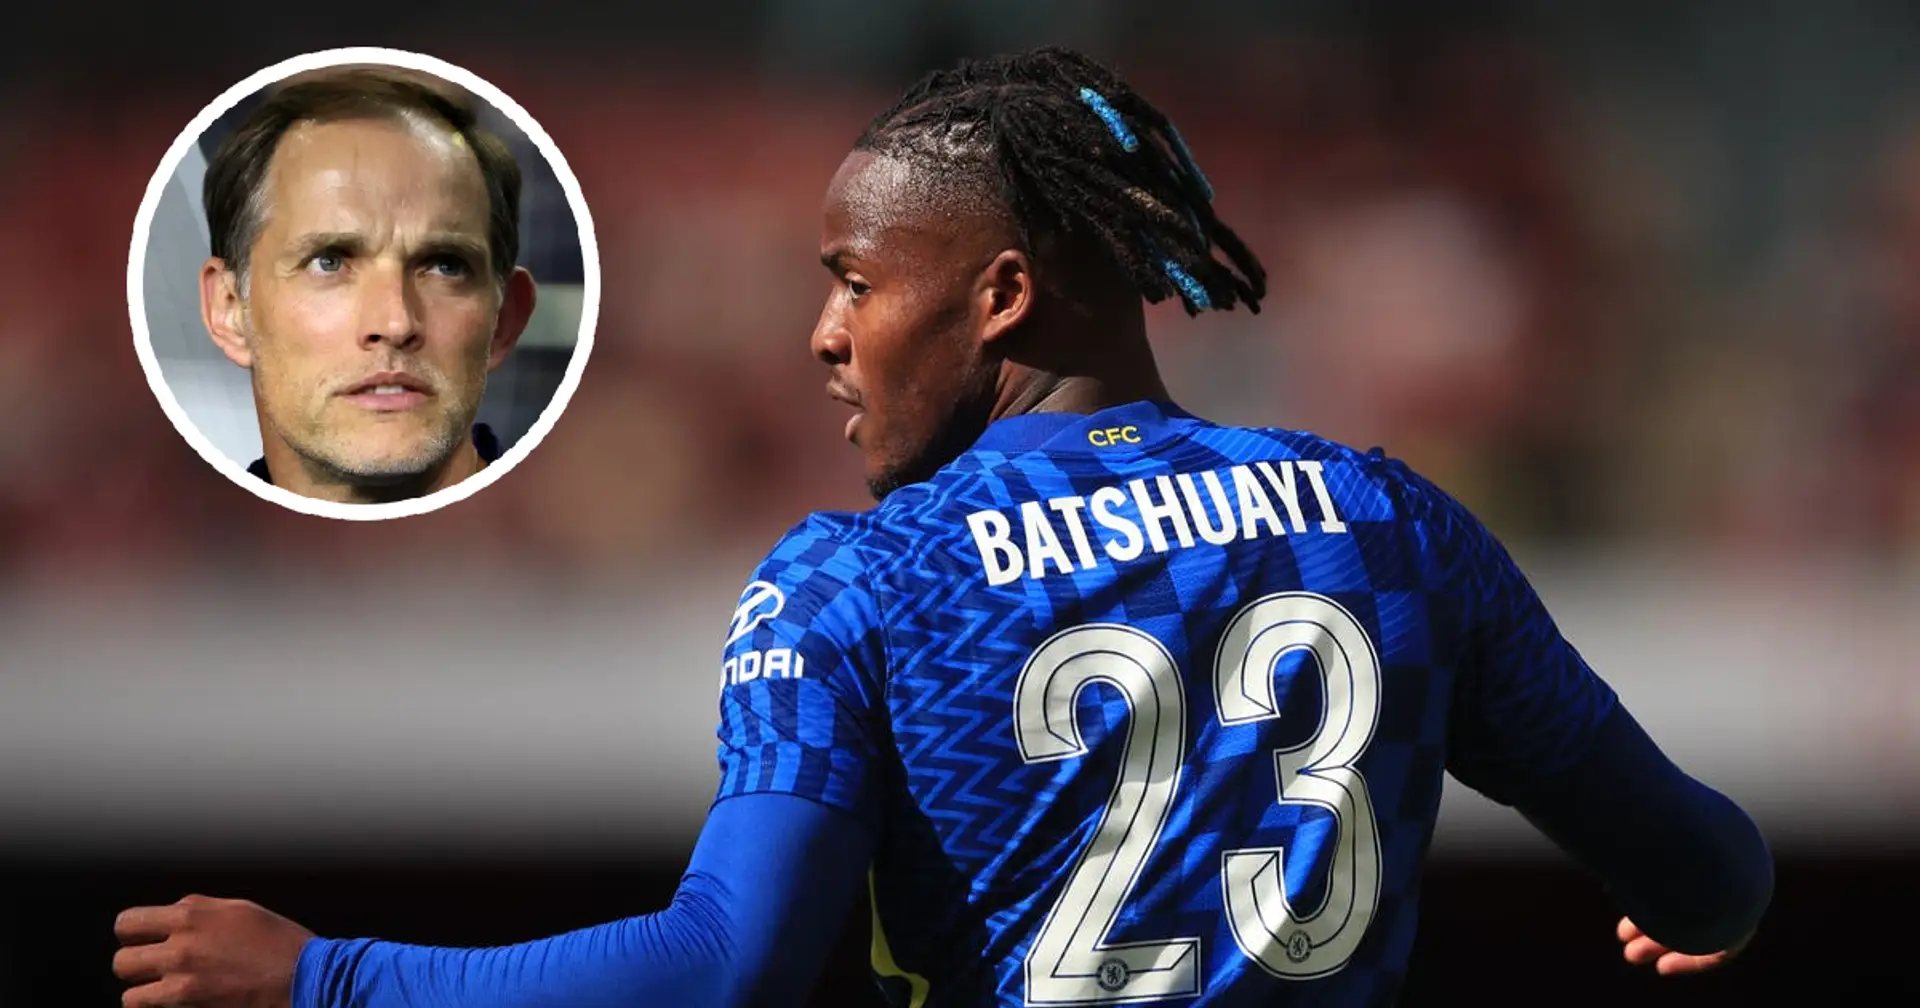 Tuchel names Batshuayi among players who 'have a big, big chance' to fight for first-team spot